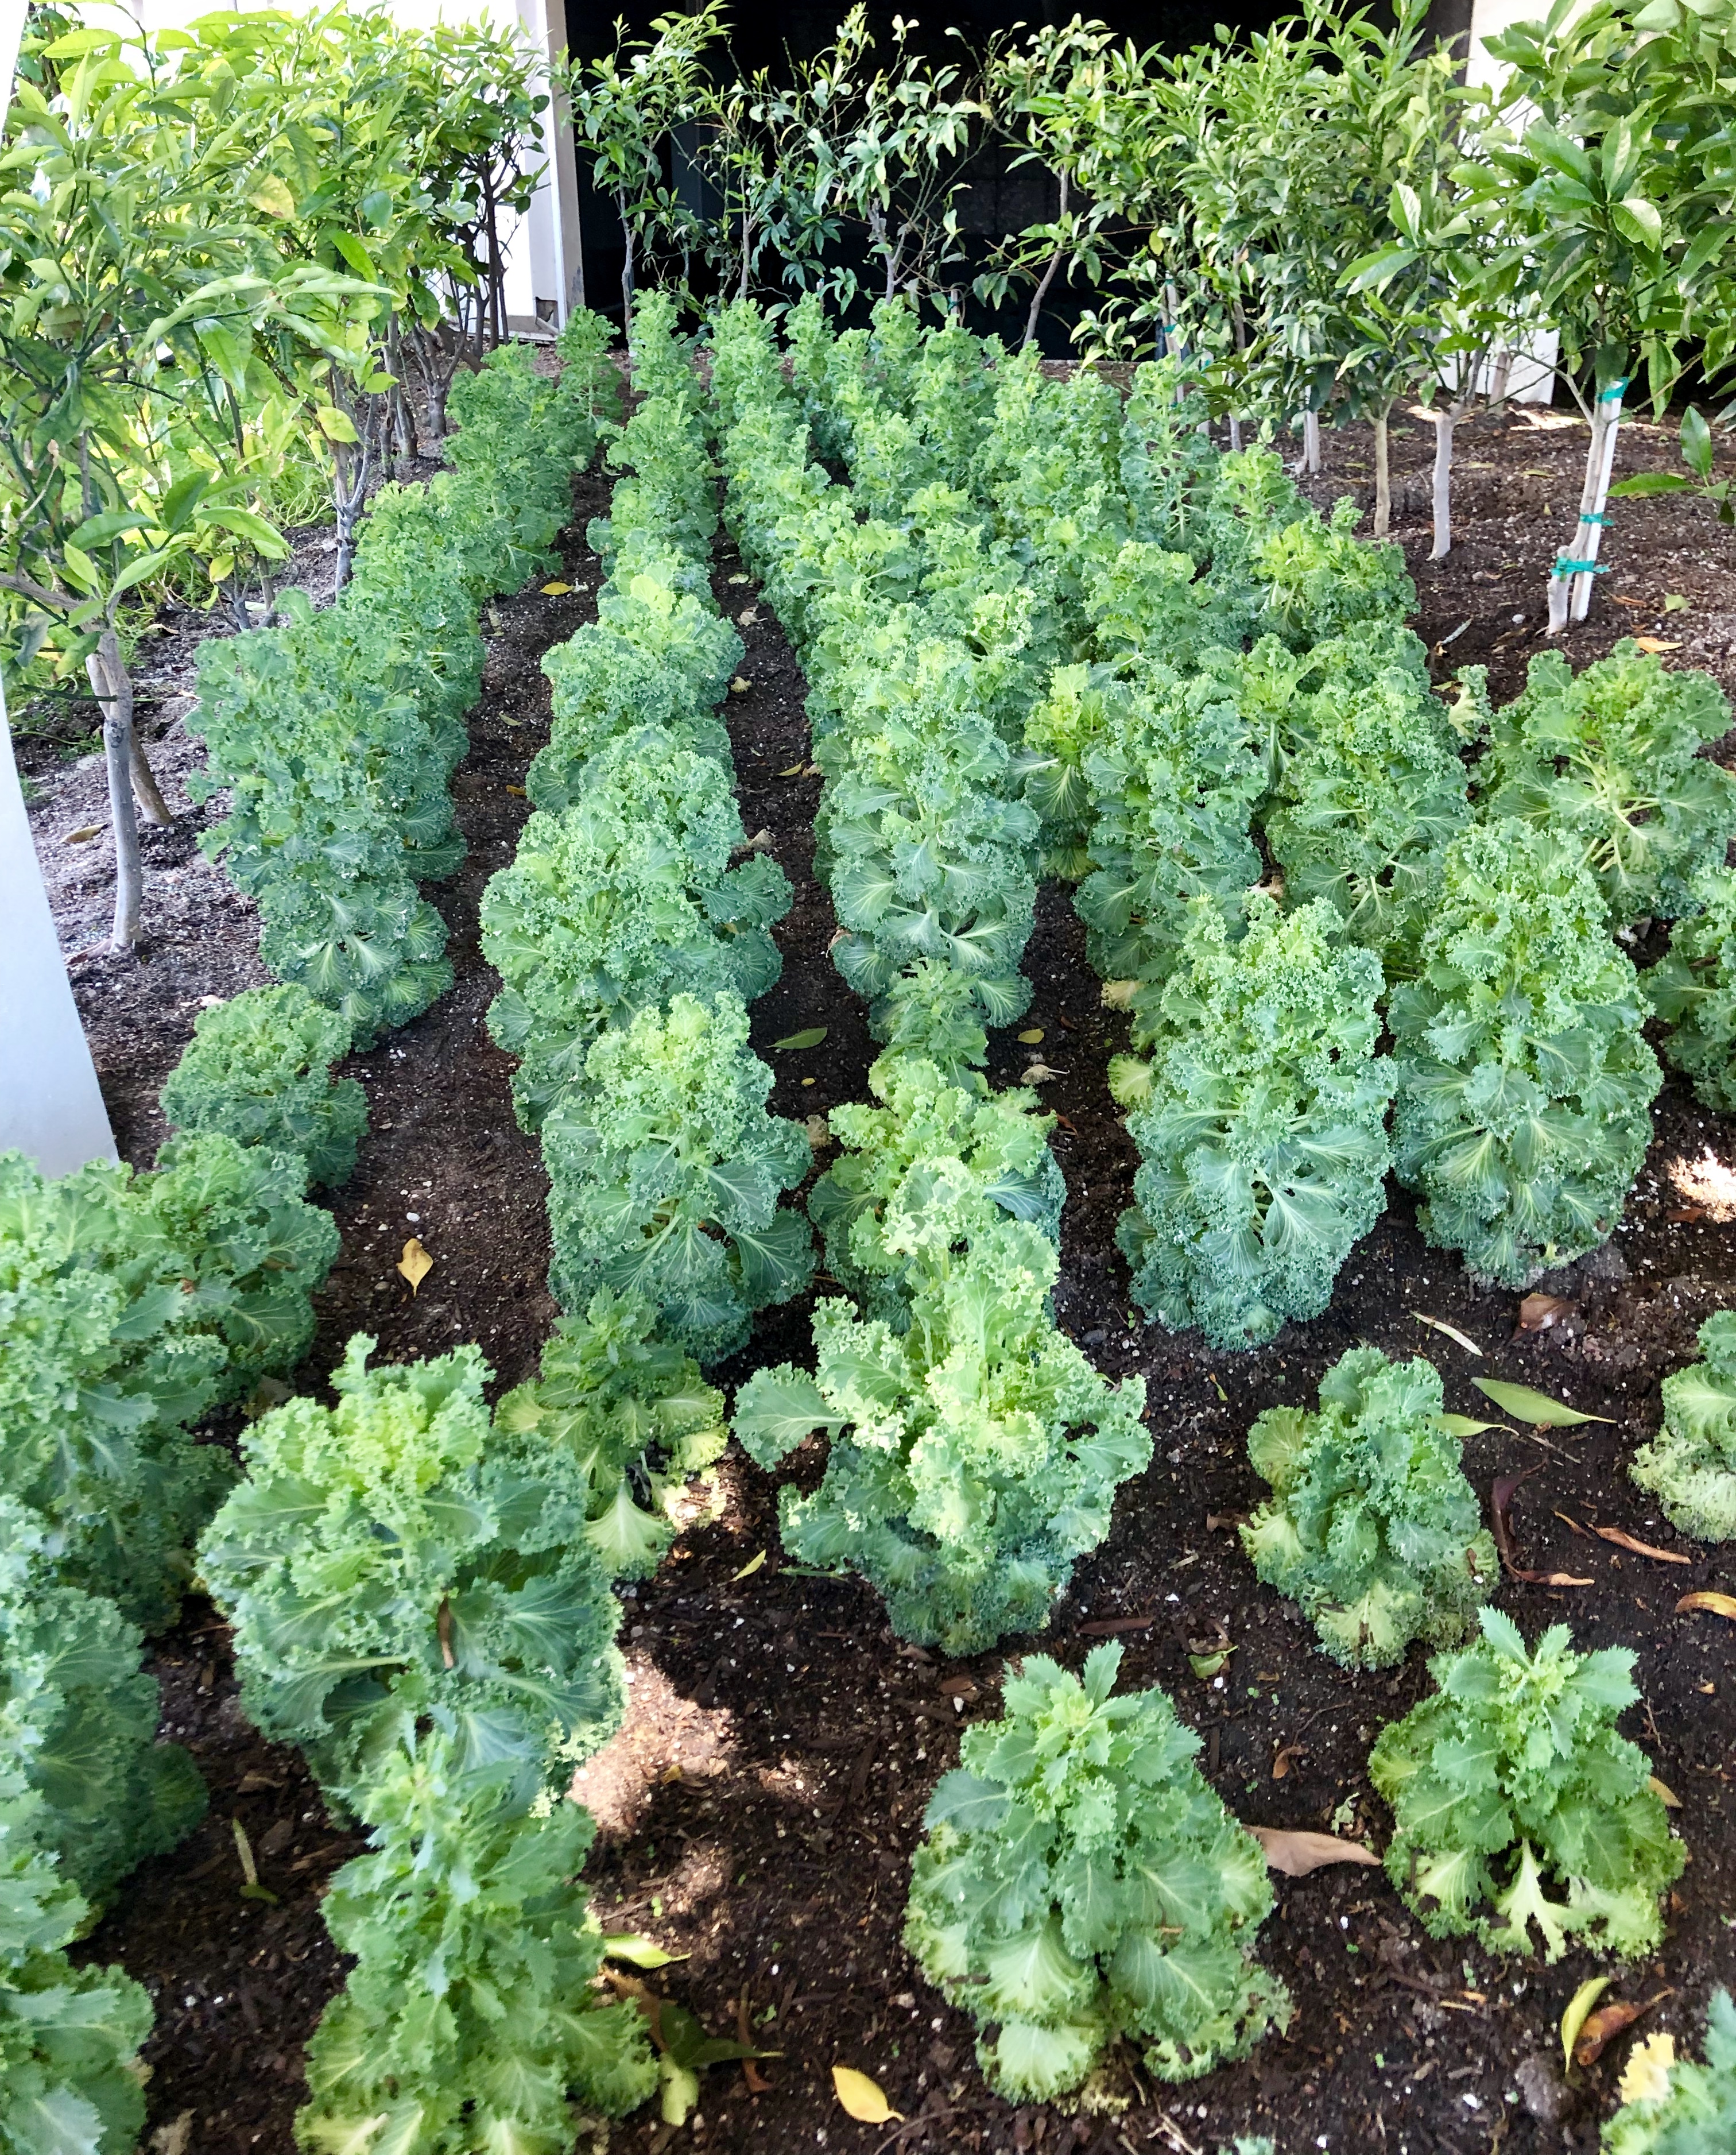 rows of lettuce Discover 5 Secrets of Tomorrowland (edible plants)